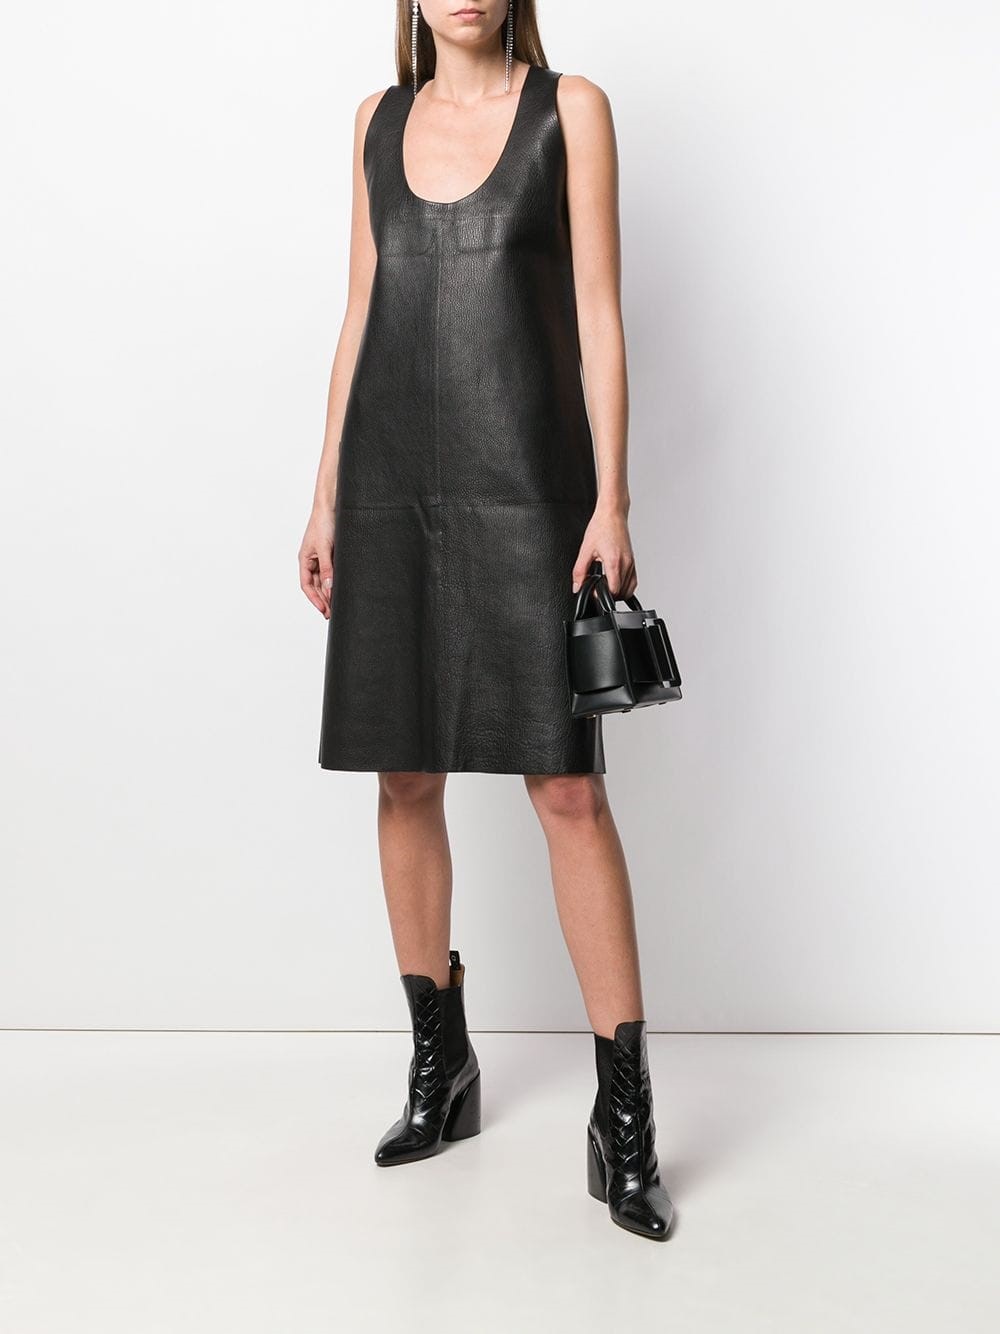 Light Literacy Can be ignored bottega veneta LEATHER DRESS available on montiboutique.com - 28505